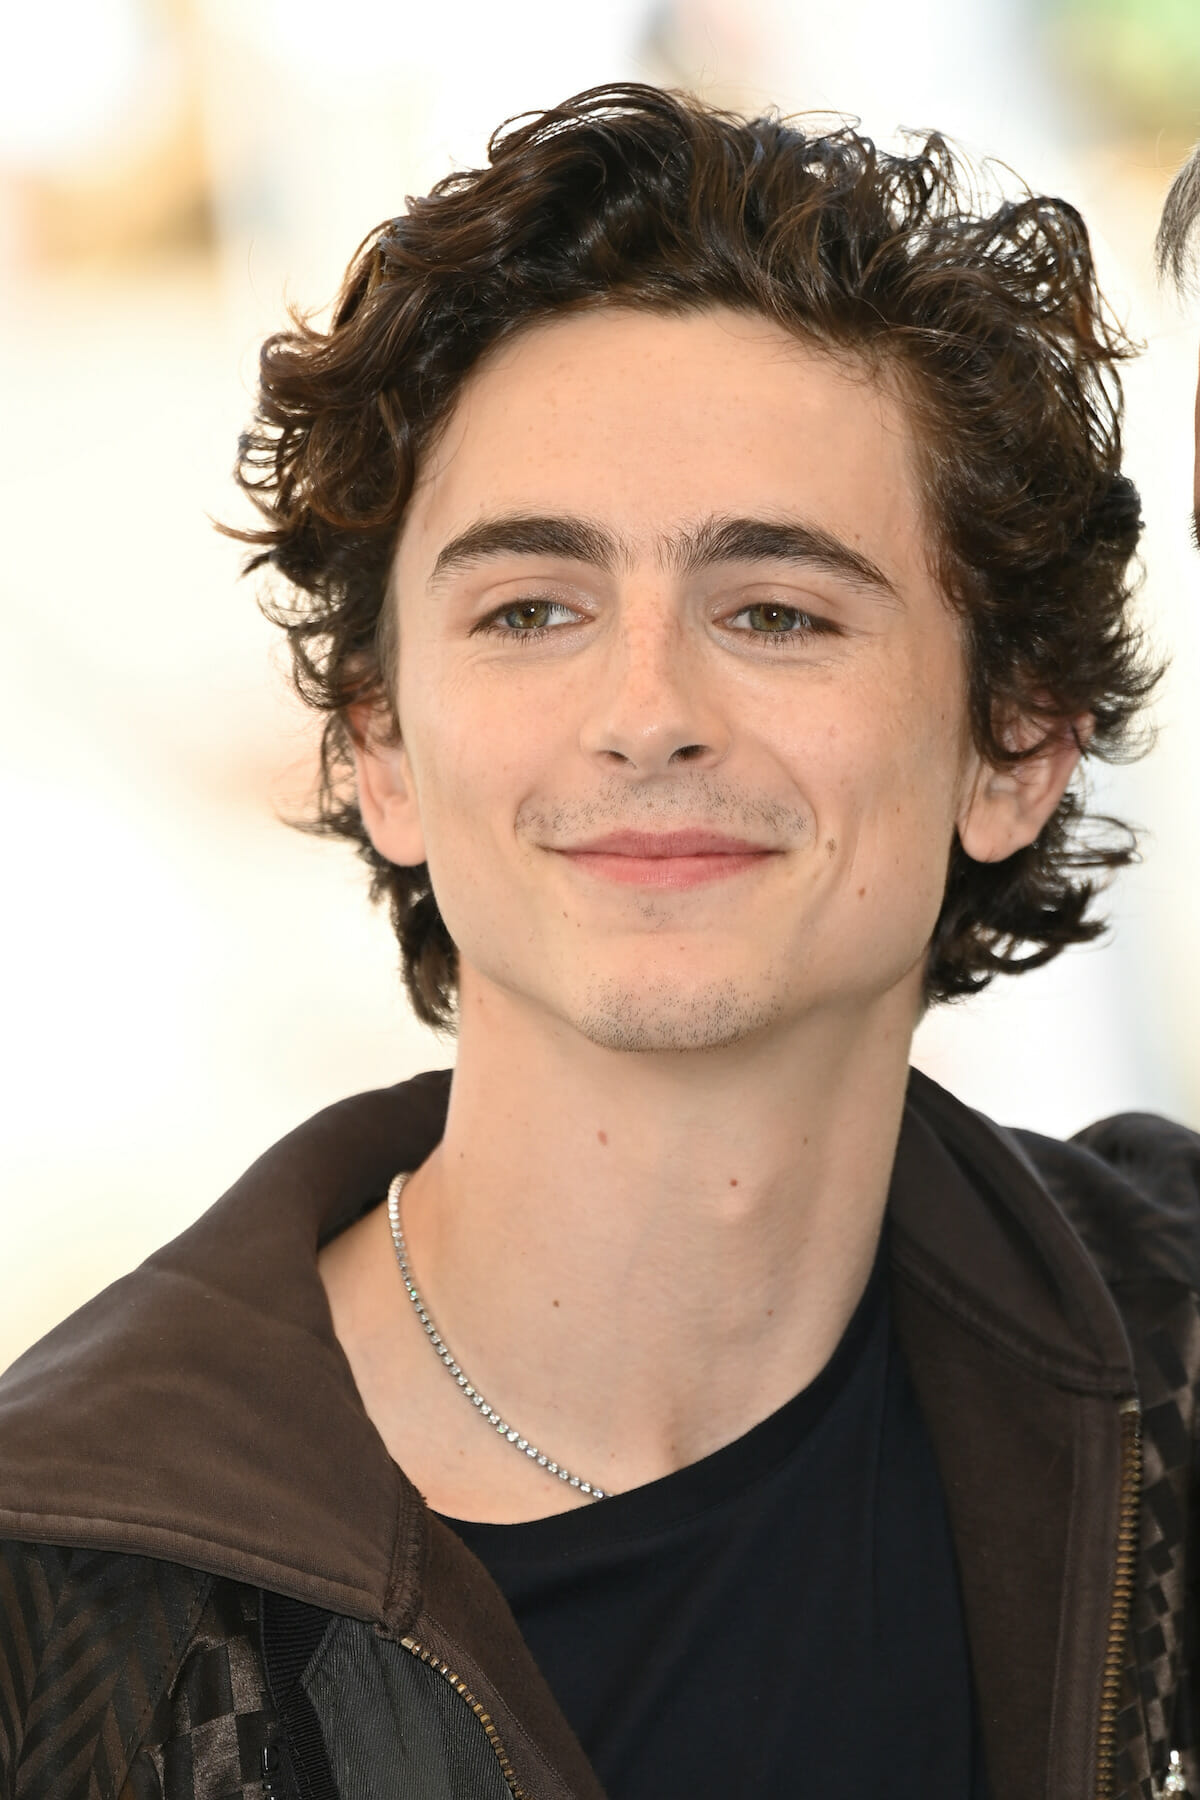 Timothee Chalamet's jewelry at 2021 Venice Film Festival